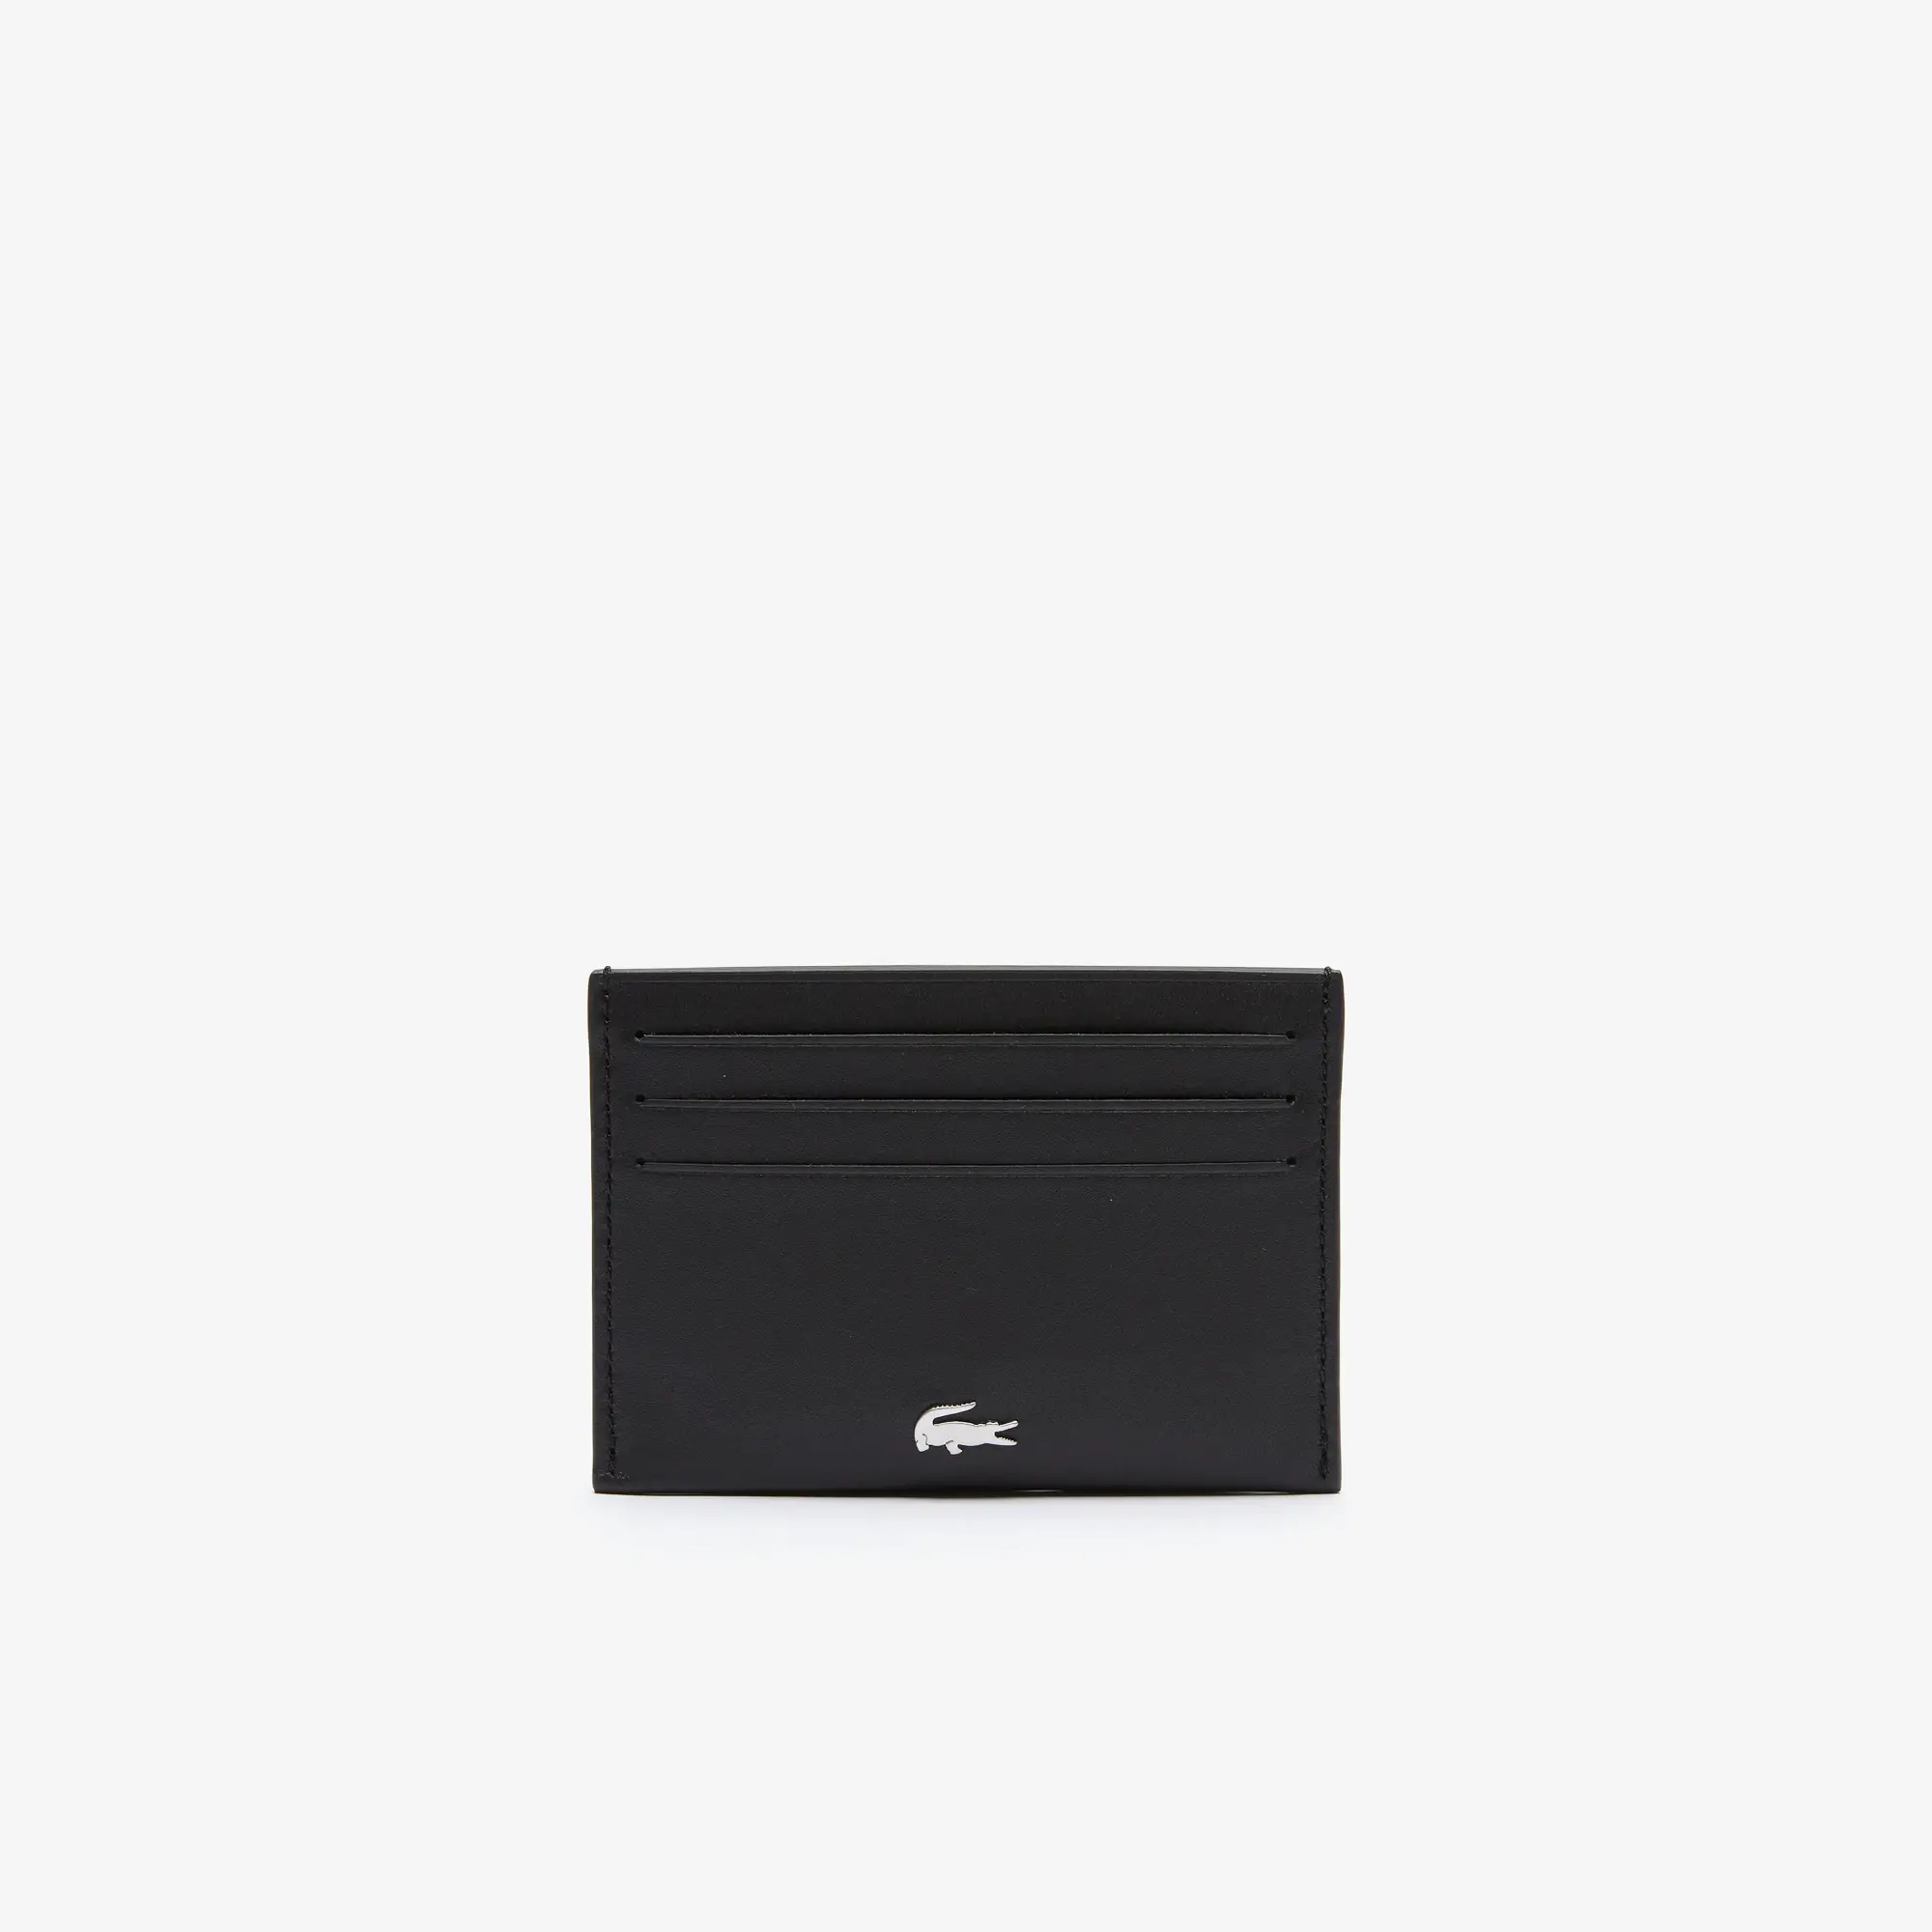 Lacoste Unisex Fitzgerald Leather Card Holder. 1